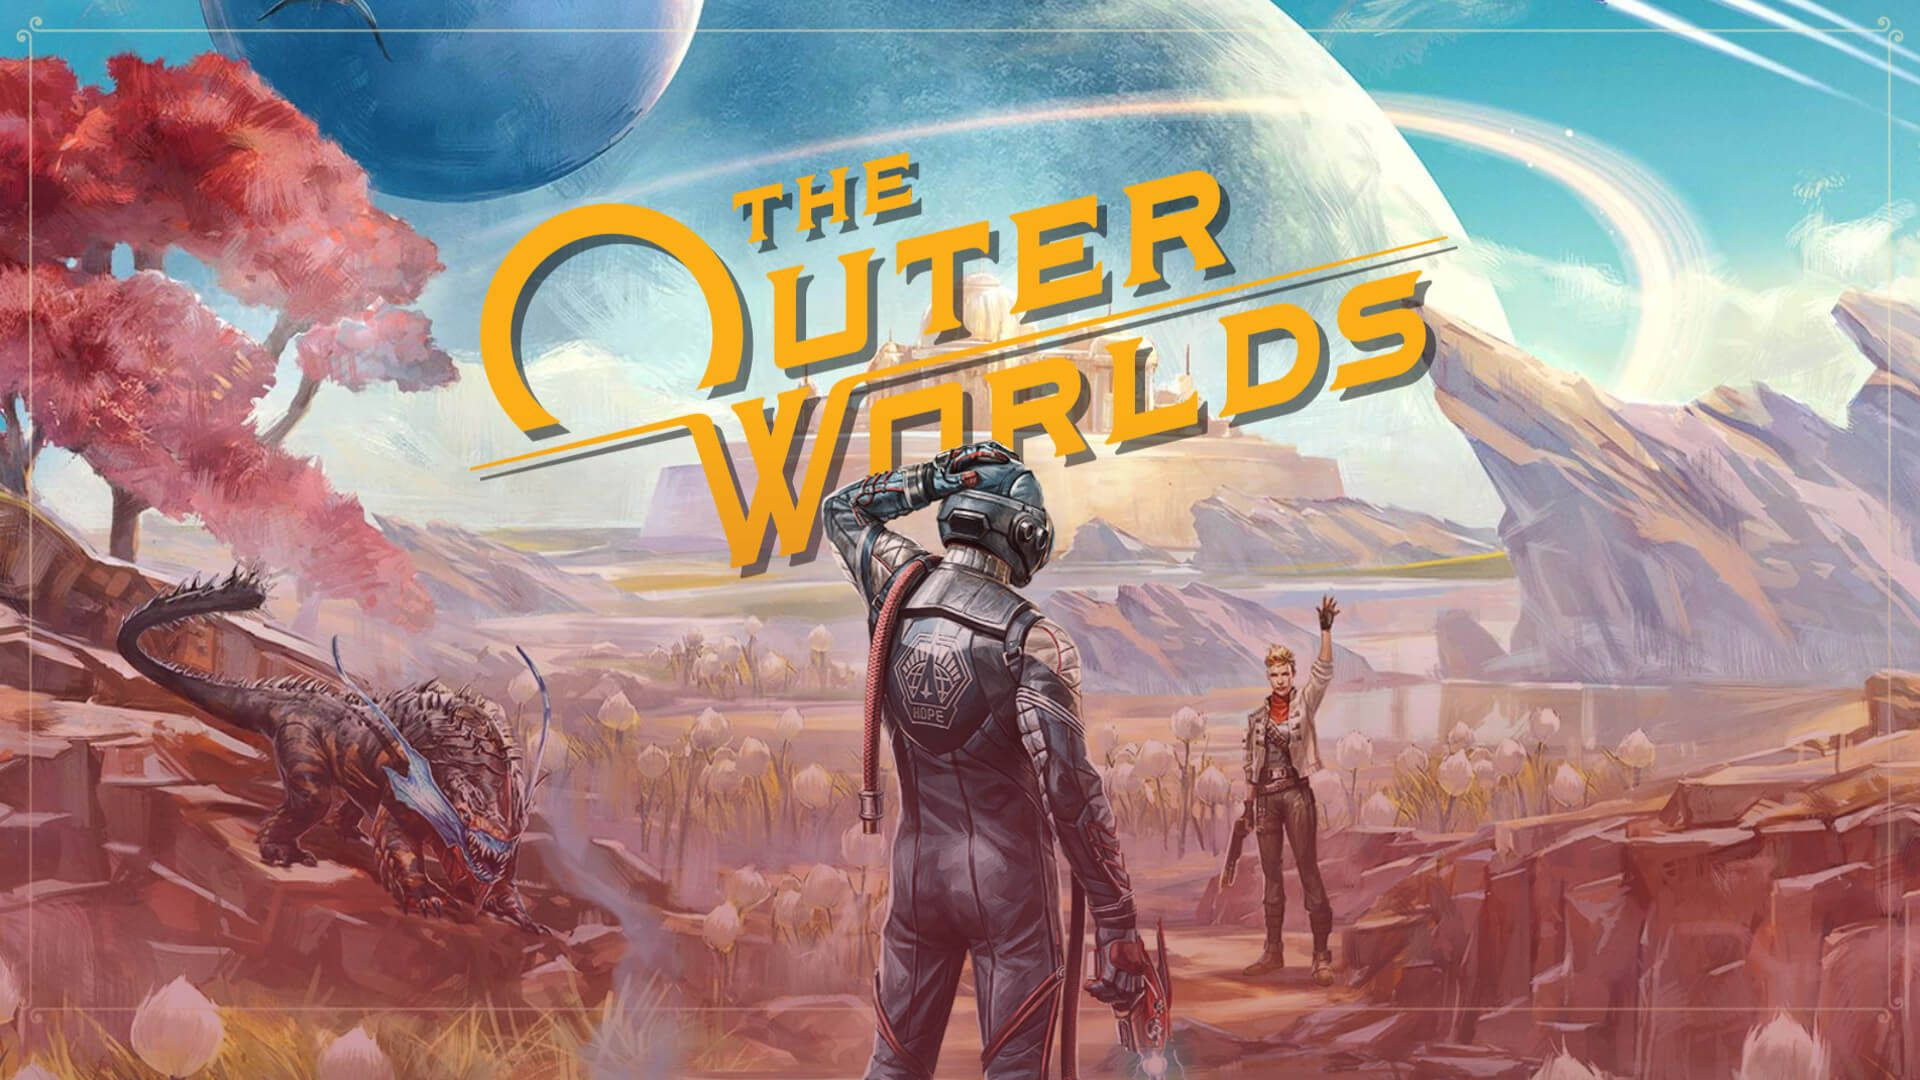 The Outer Worlds Game Art Wallpaper